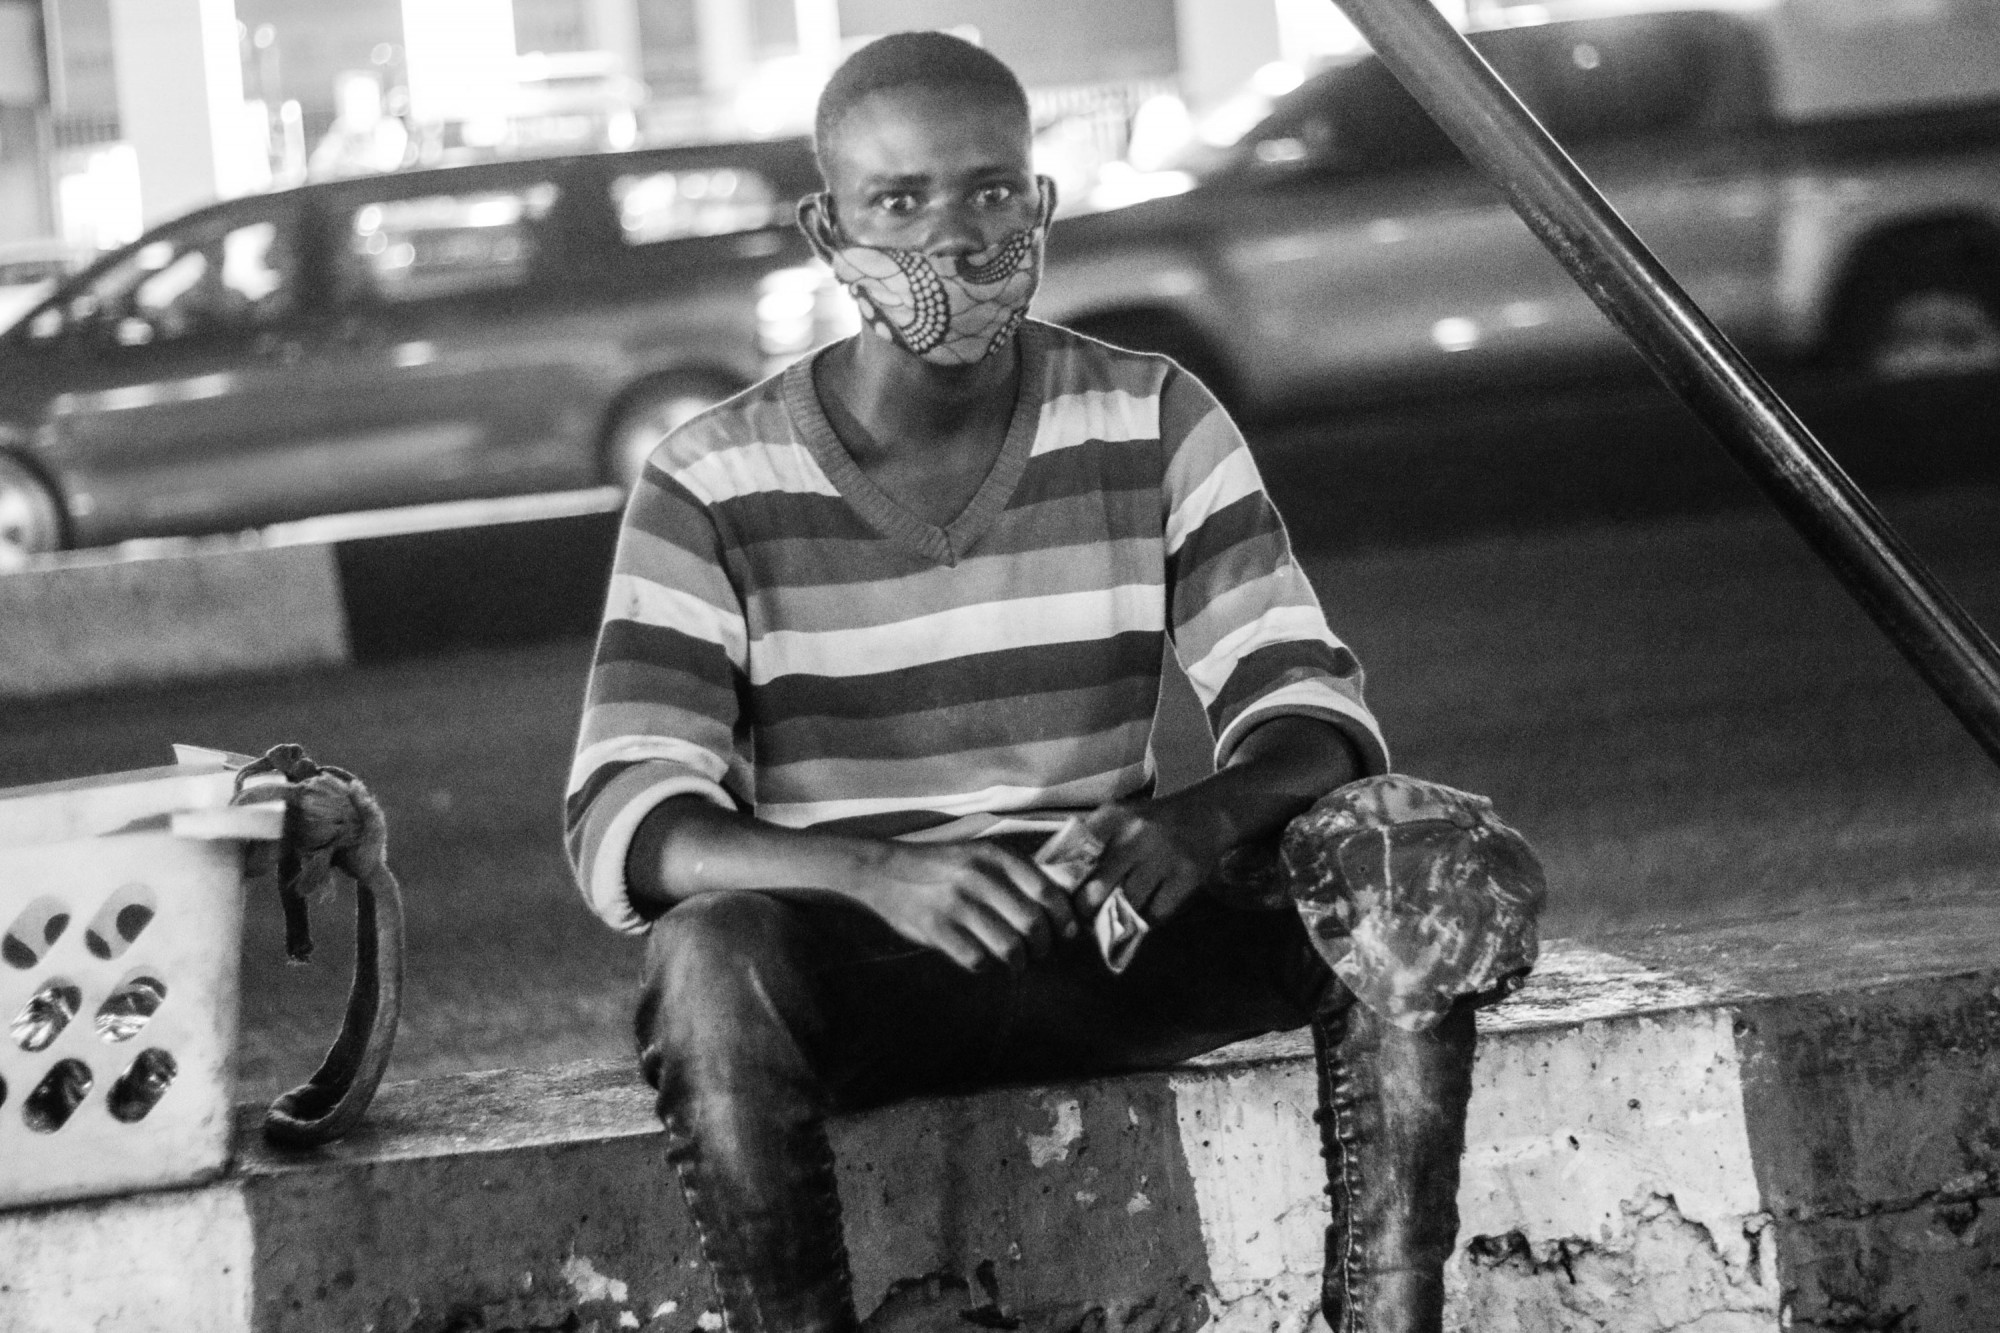 Fabrice, a street vendor and a resident of the disadvantaged Camp Luka neighbourhood of Kinshasa, said that he cannot afford a disposable mask and instead washes his cloth mask each night for use the next day. © Justin Makangara for Fondation Carmignac